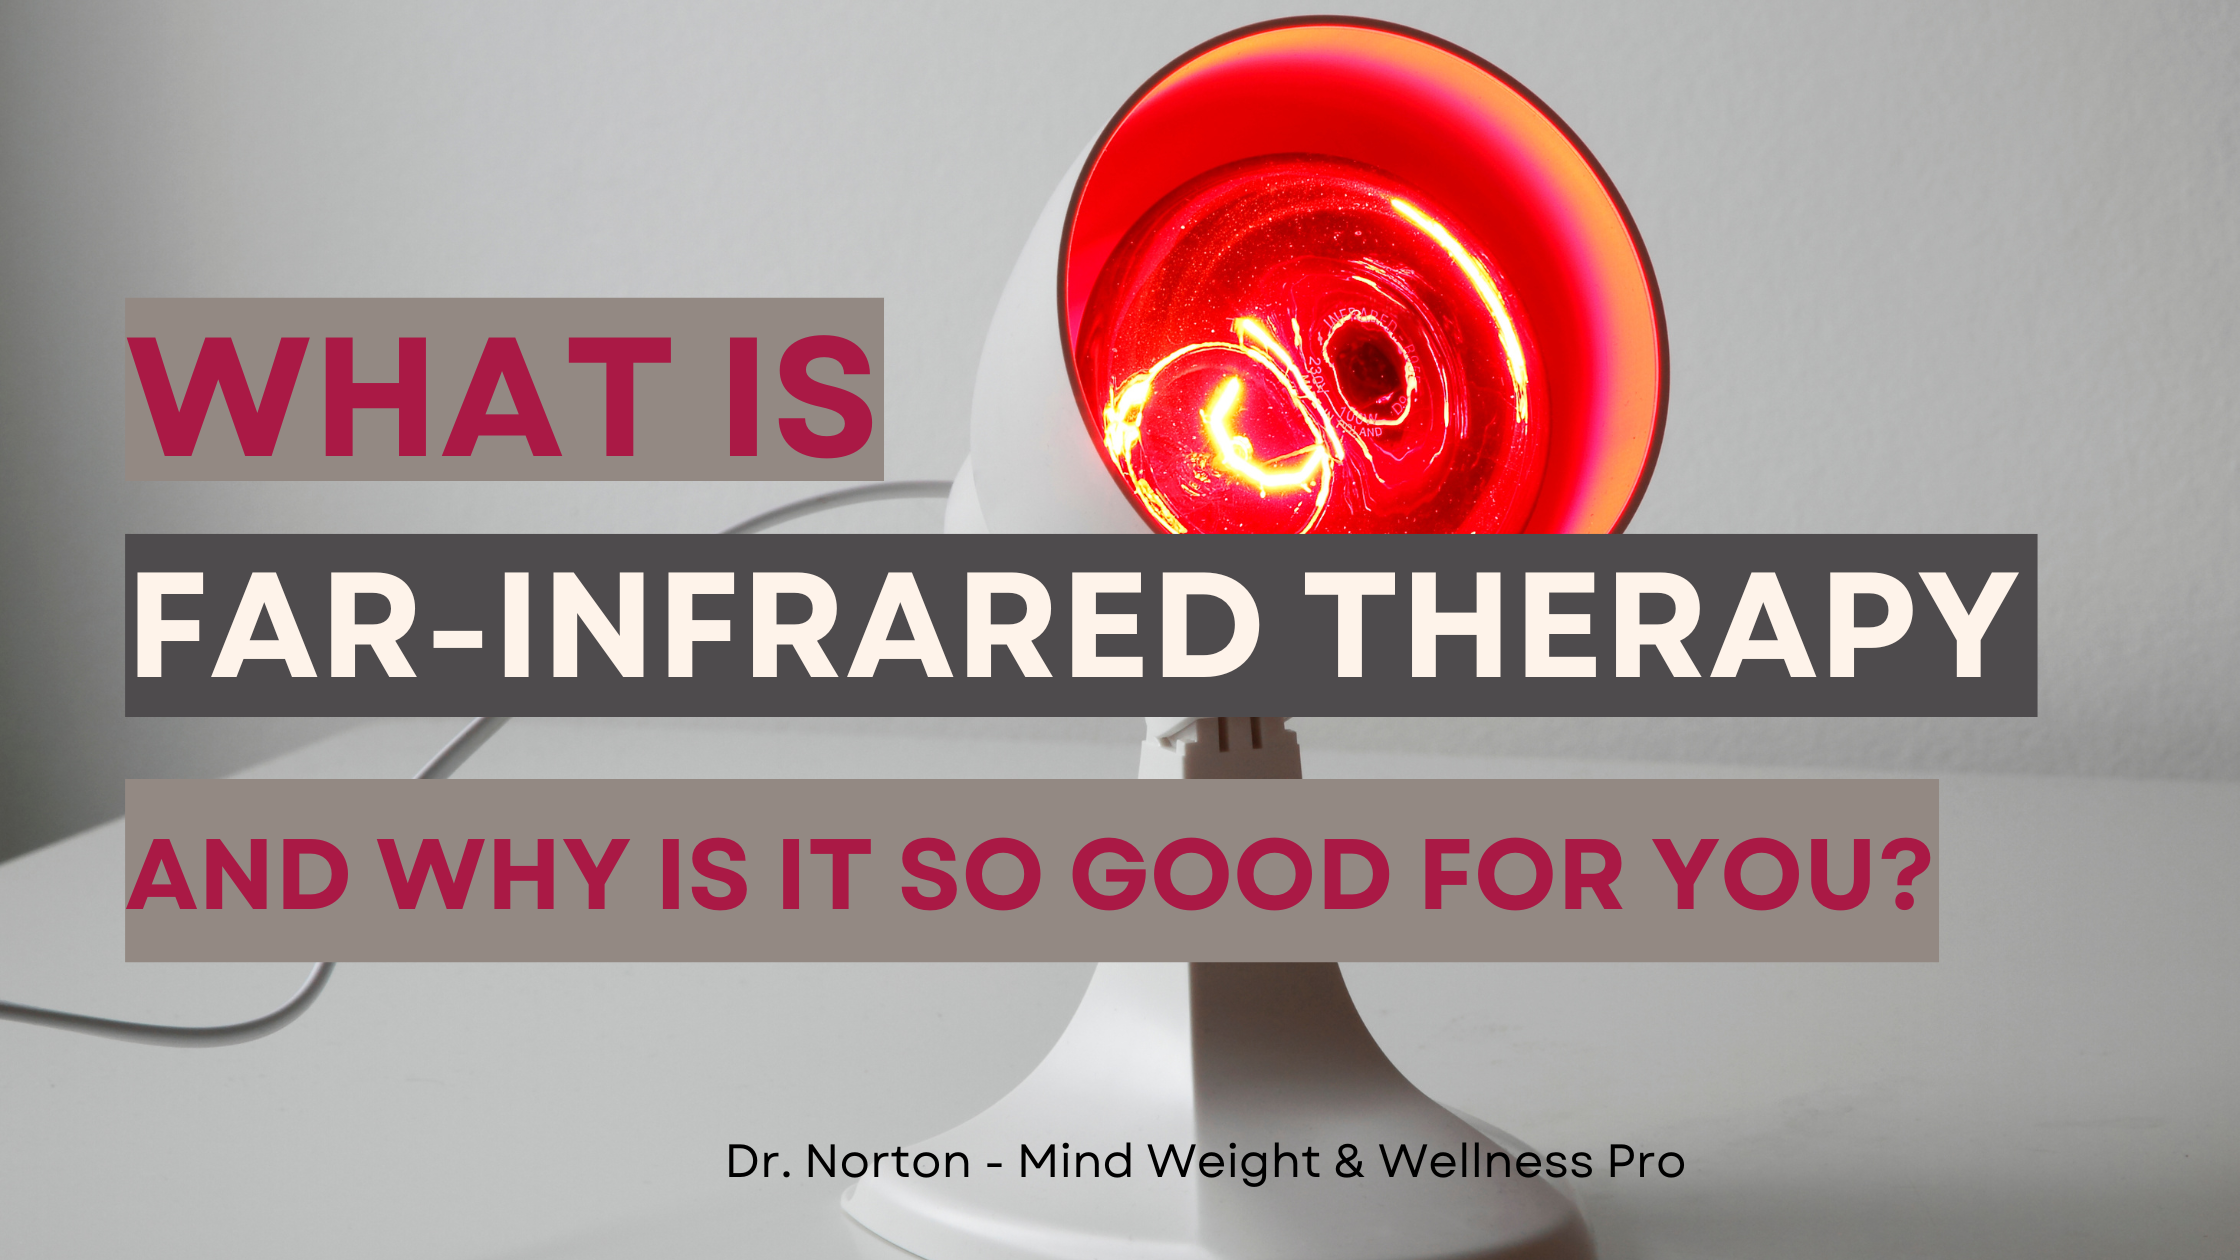 What Is Far-Infrared Therapy (FIR) And Why Is It So Good For You